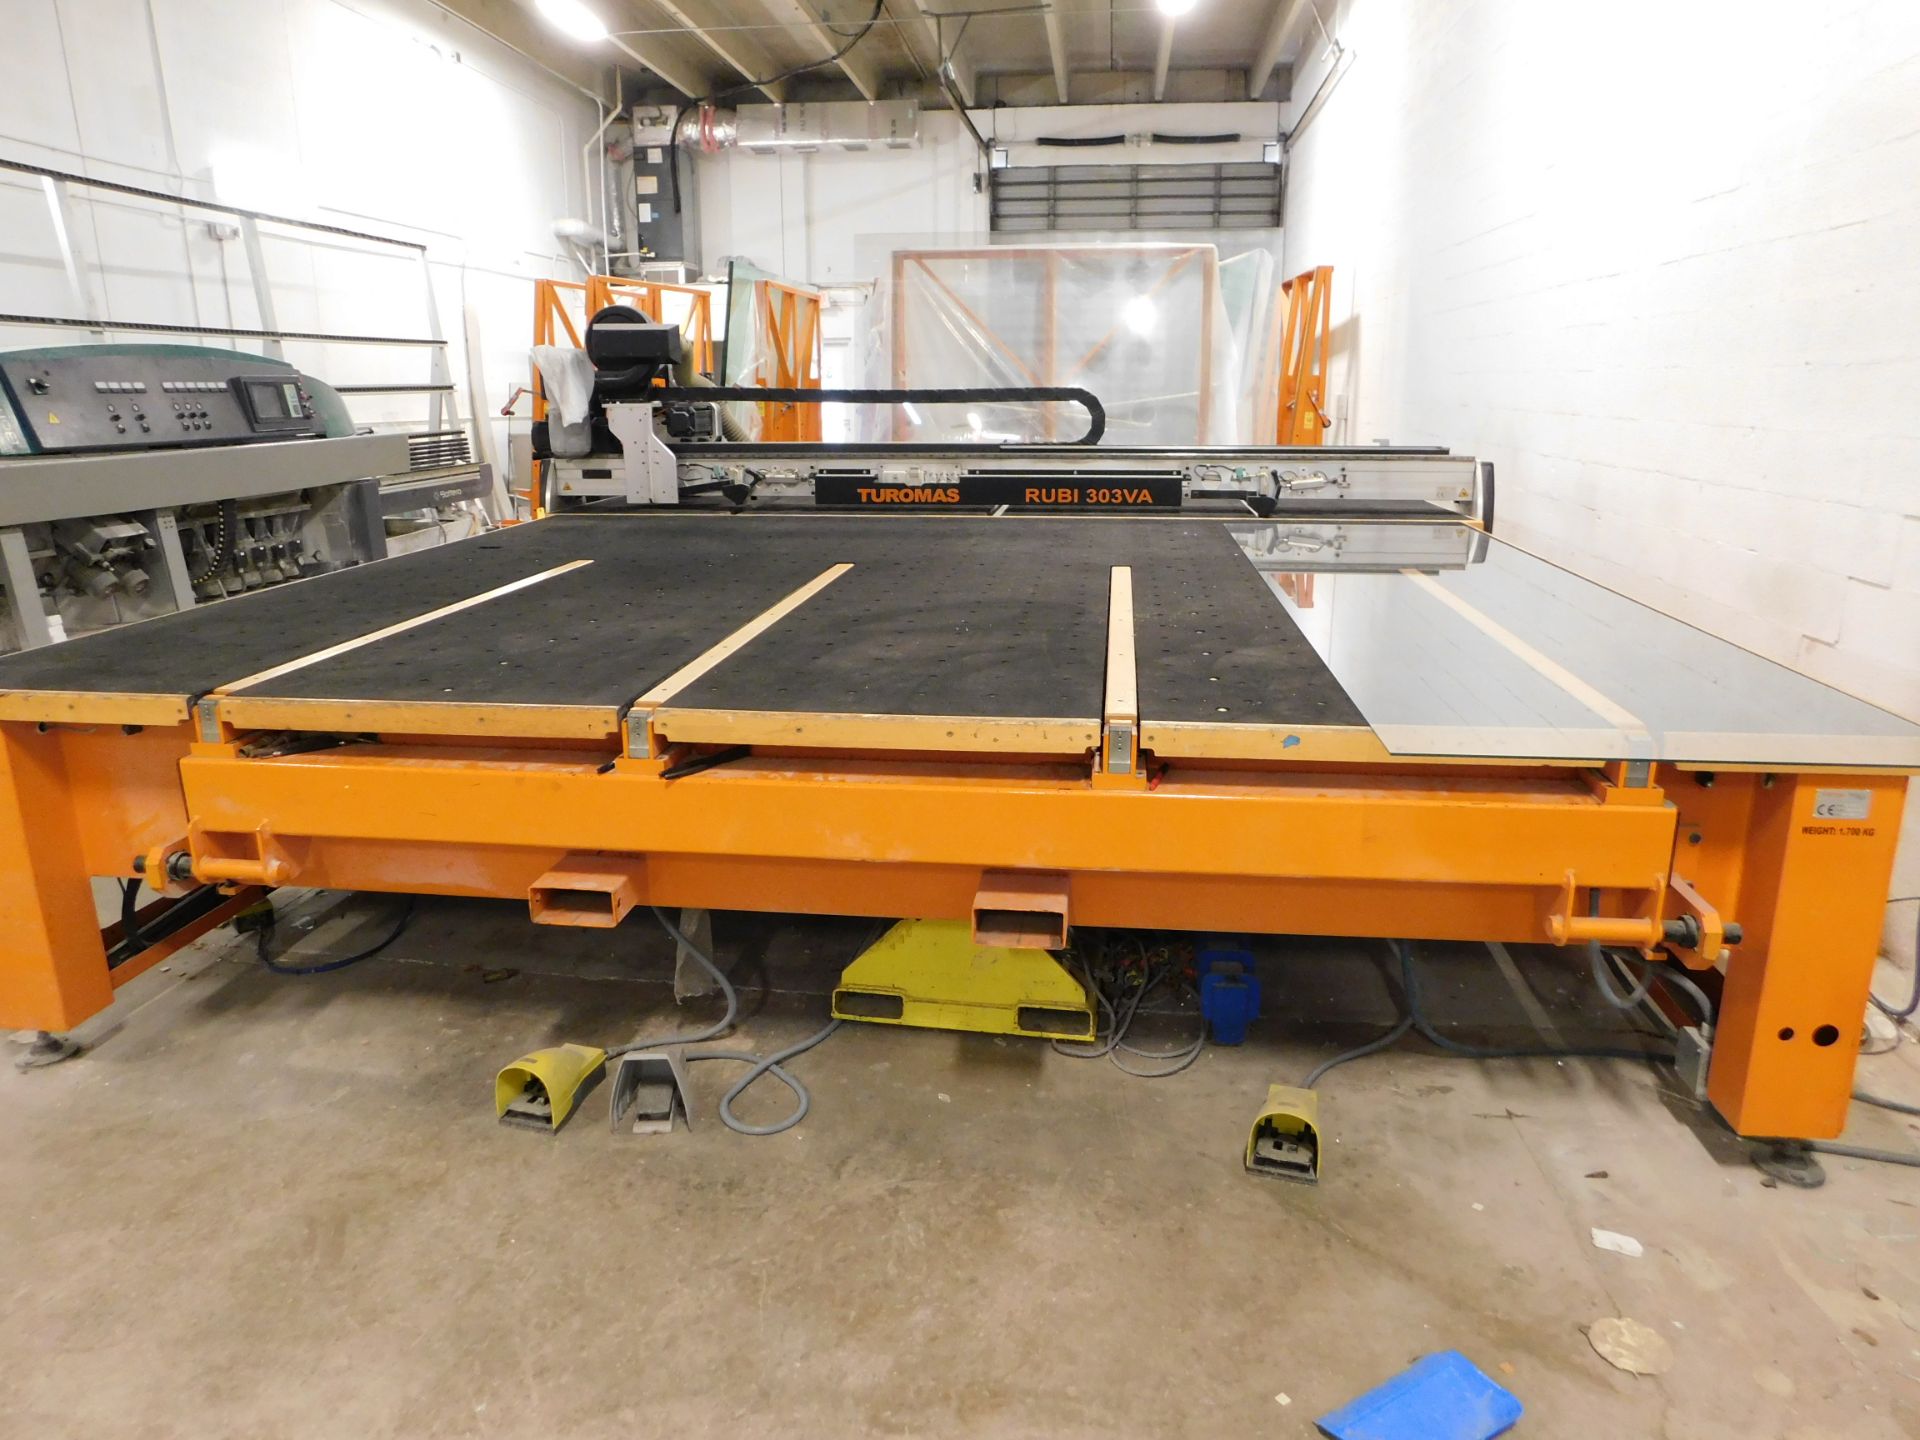 2019 Turomas Model RUBI 303VA Float Glass CNC Cutting Table, s/n MP-1430, 14' x 148", Includes - Image 11 of 13